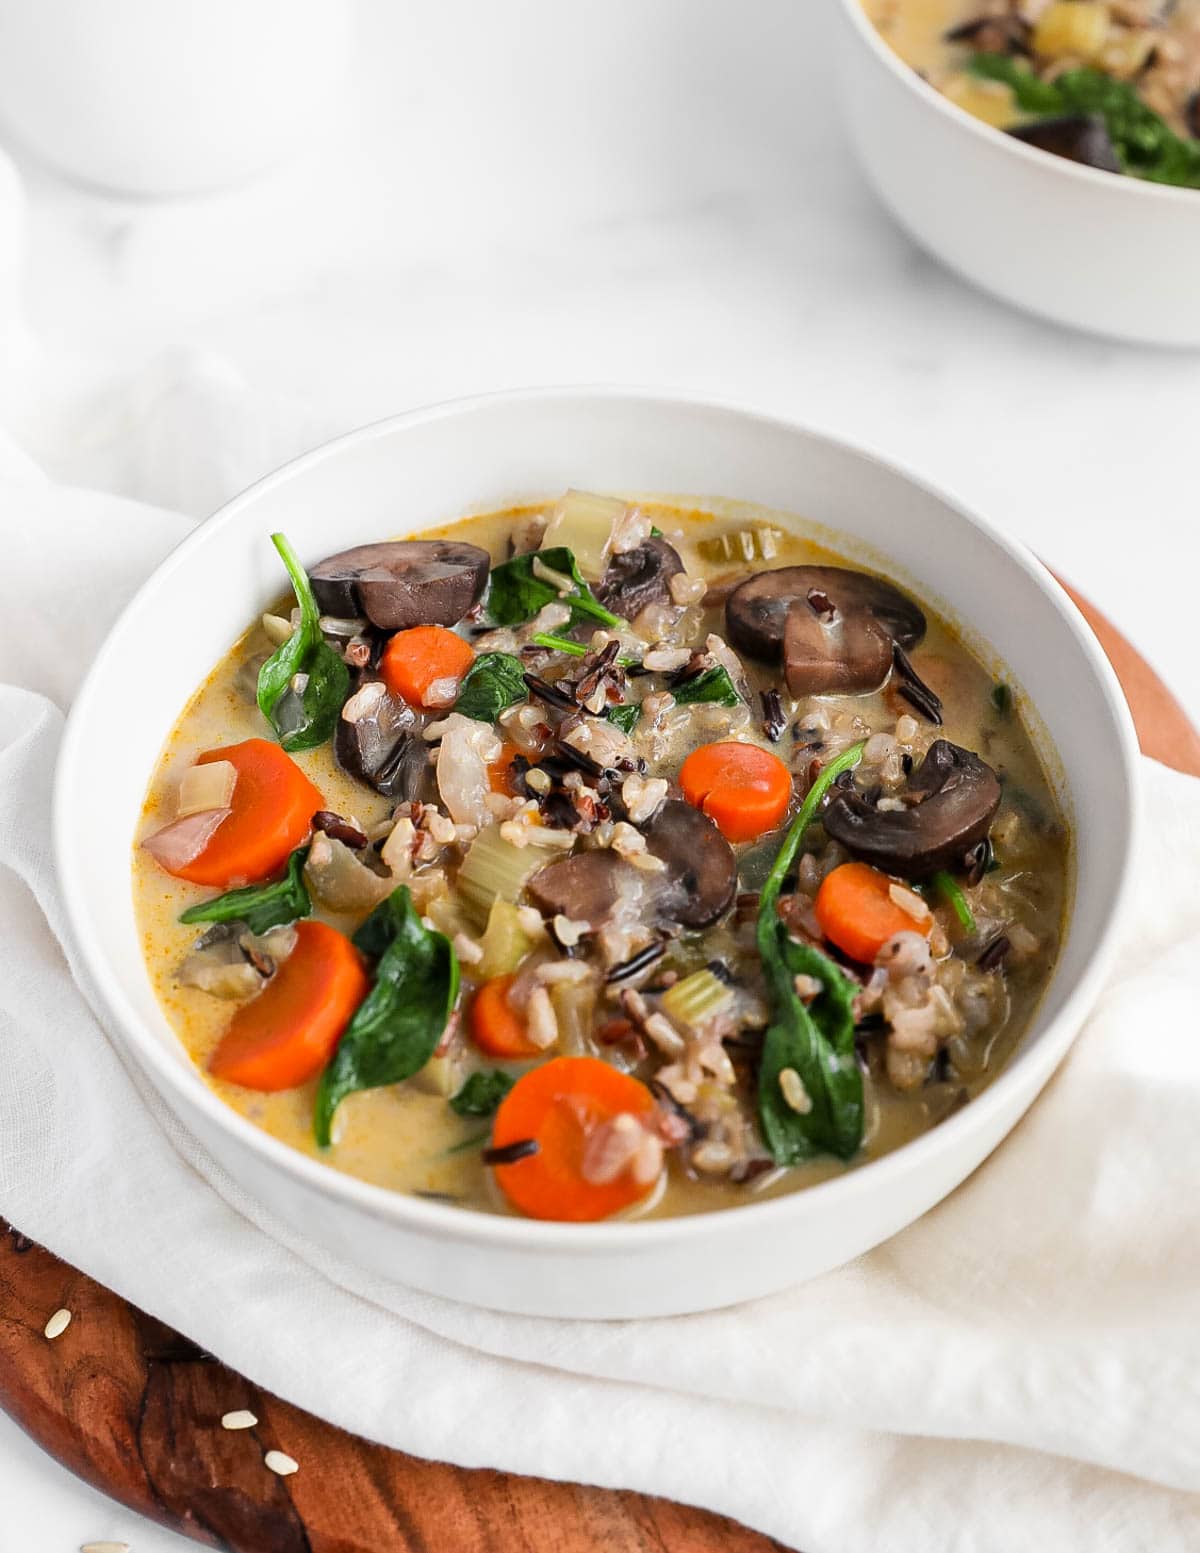 A bowl of vegetable and rice soup with mushrooms, carrots, spinach.